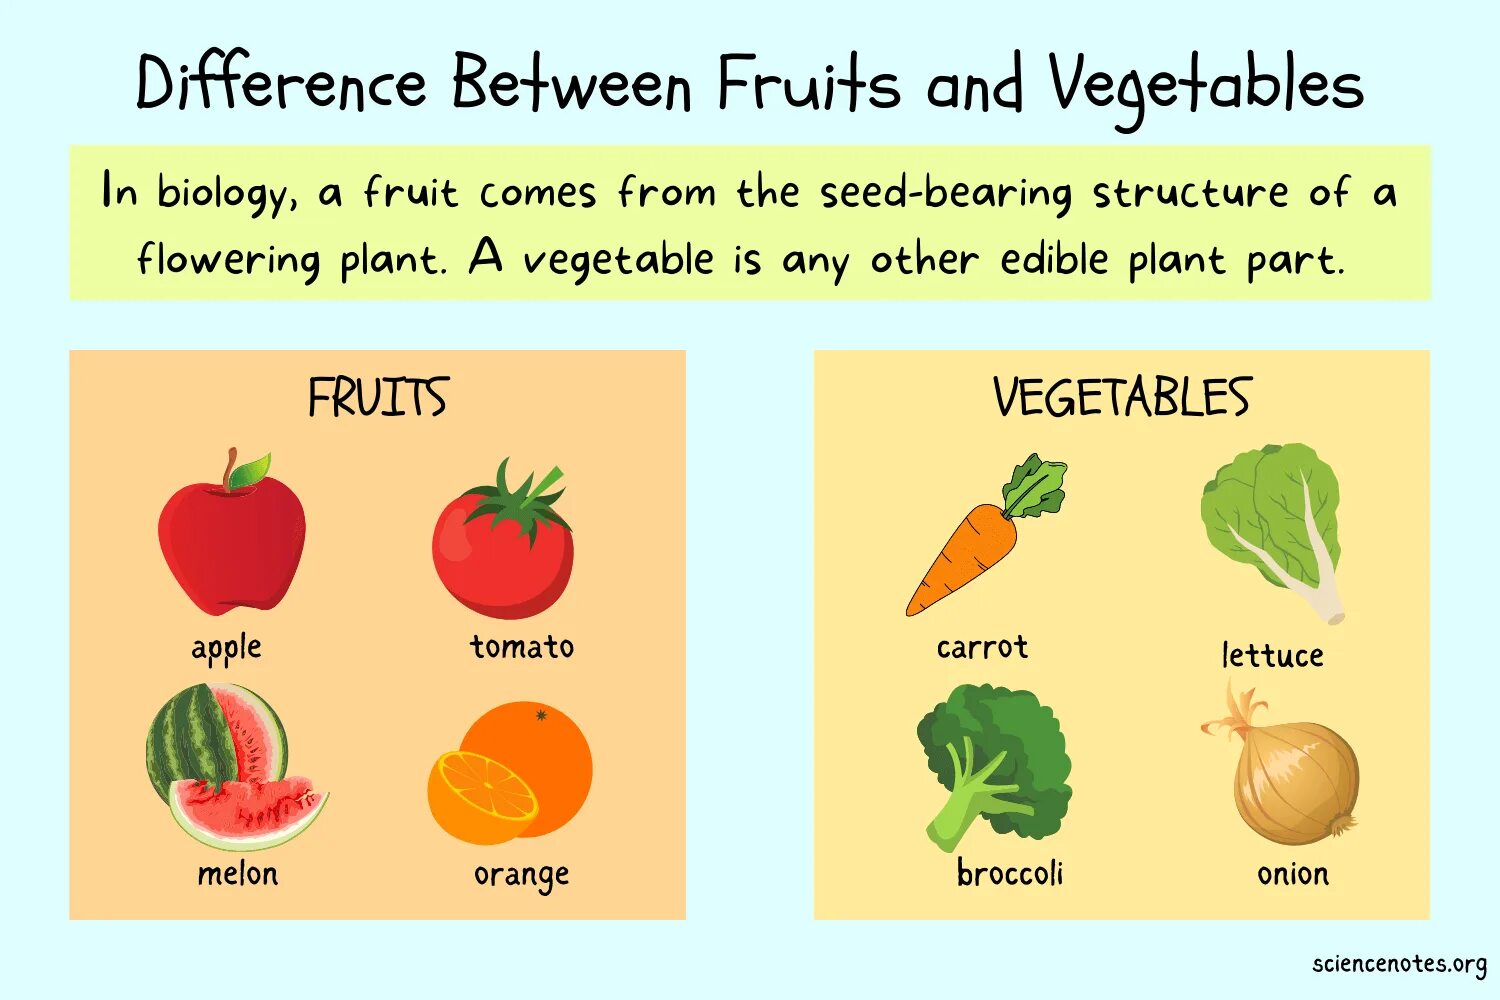 The fruits are together перевод. Fruit or Fruits. Овощи vs фрукты. Vegetables are. Fruit or Fruits как правильно.